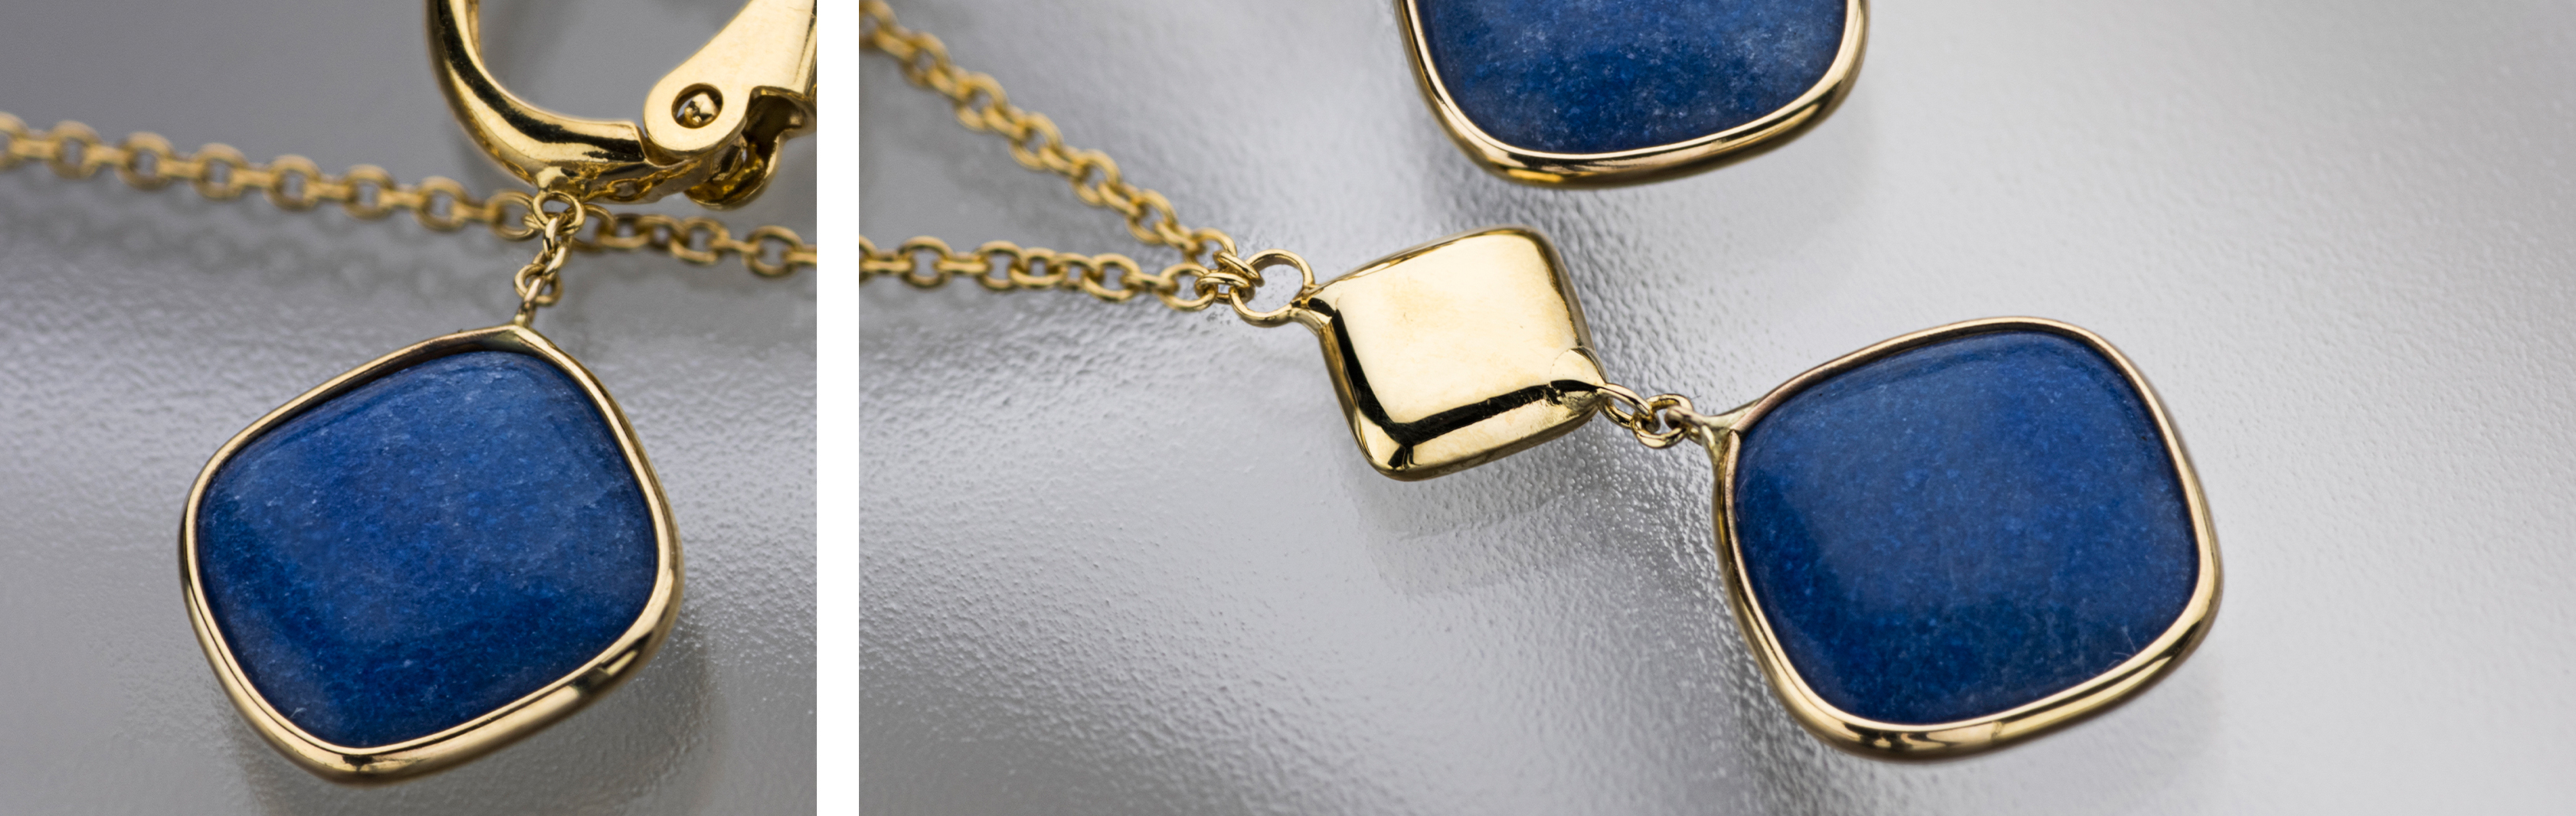 Selene Collection | 14K Gold and Chalcedony Jewelry